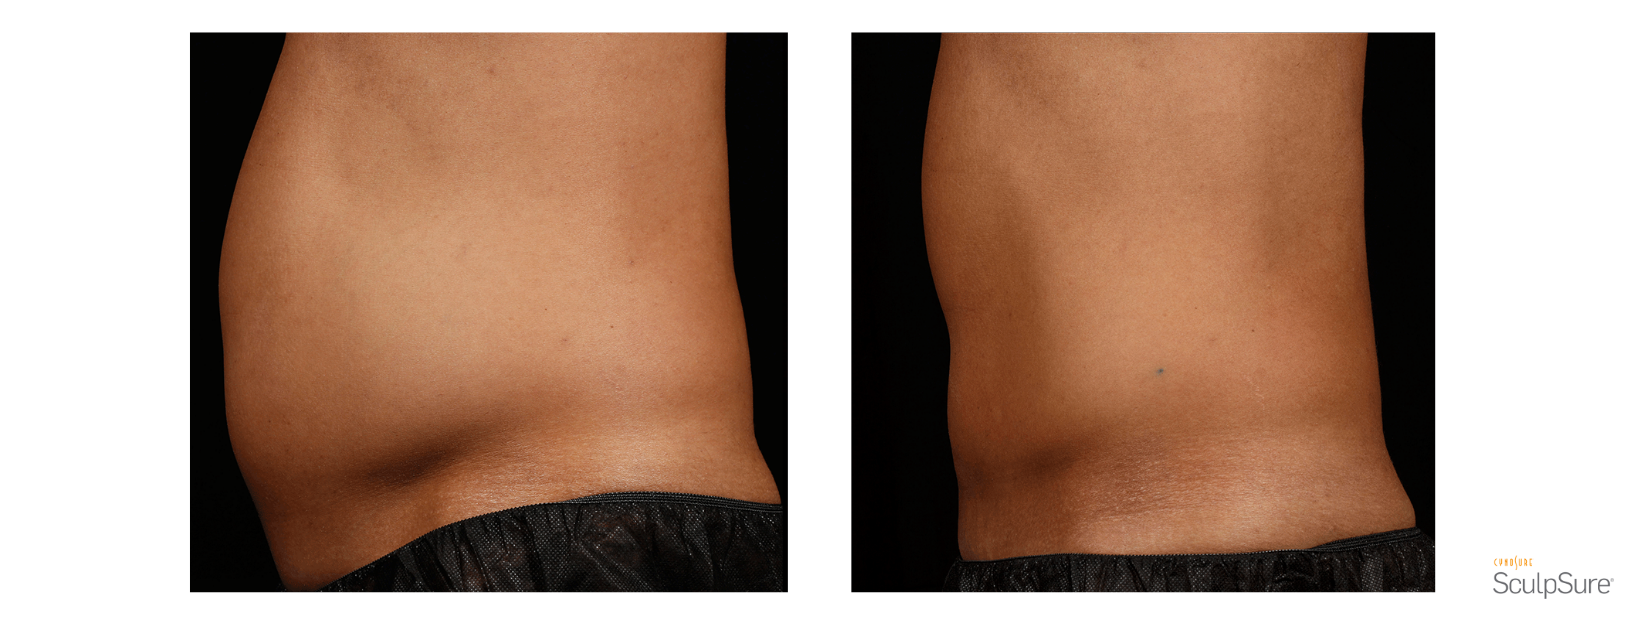 SculpSure Stomach and Love handles